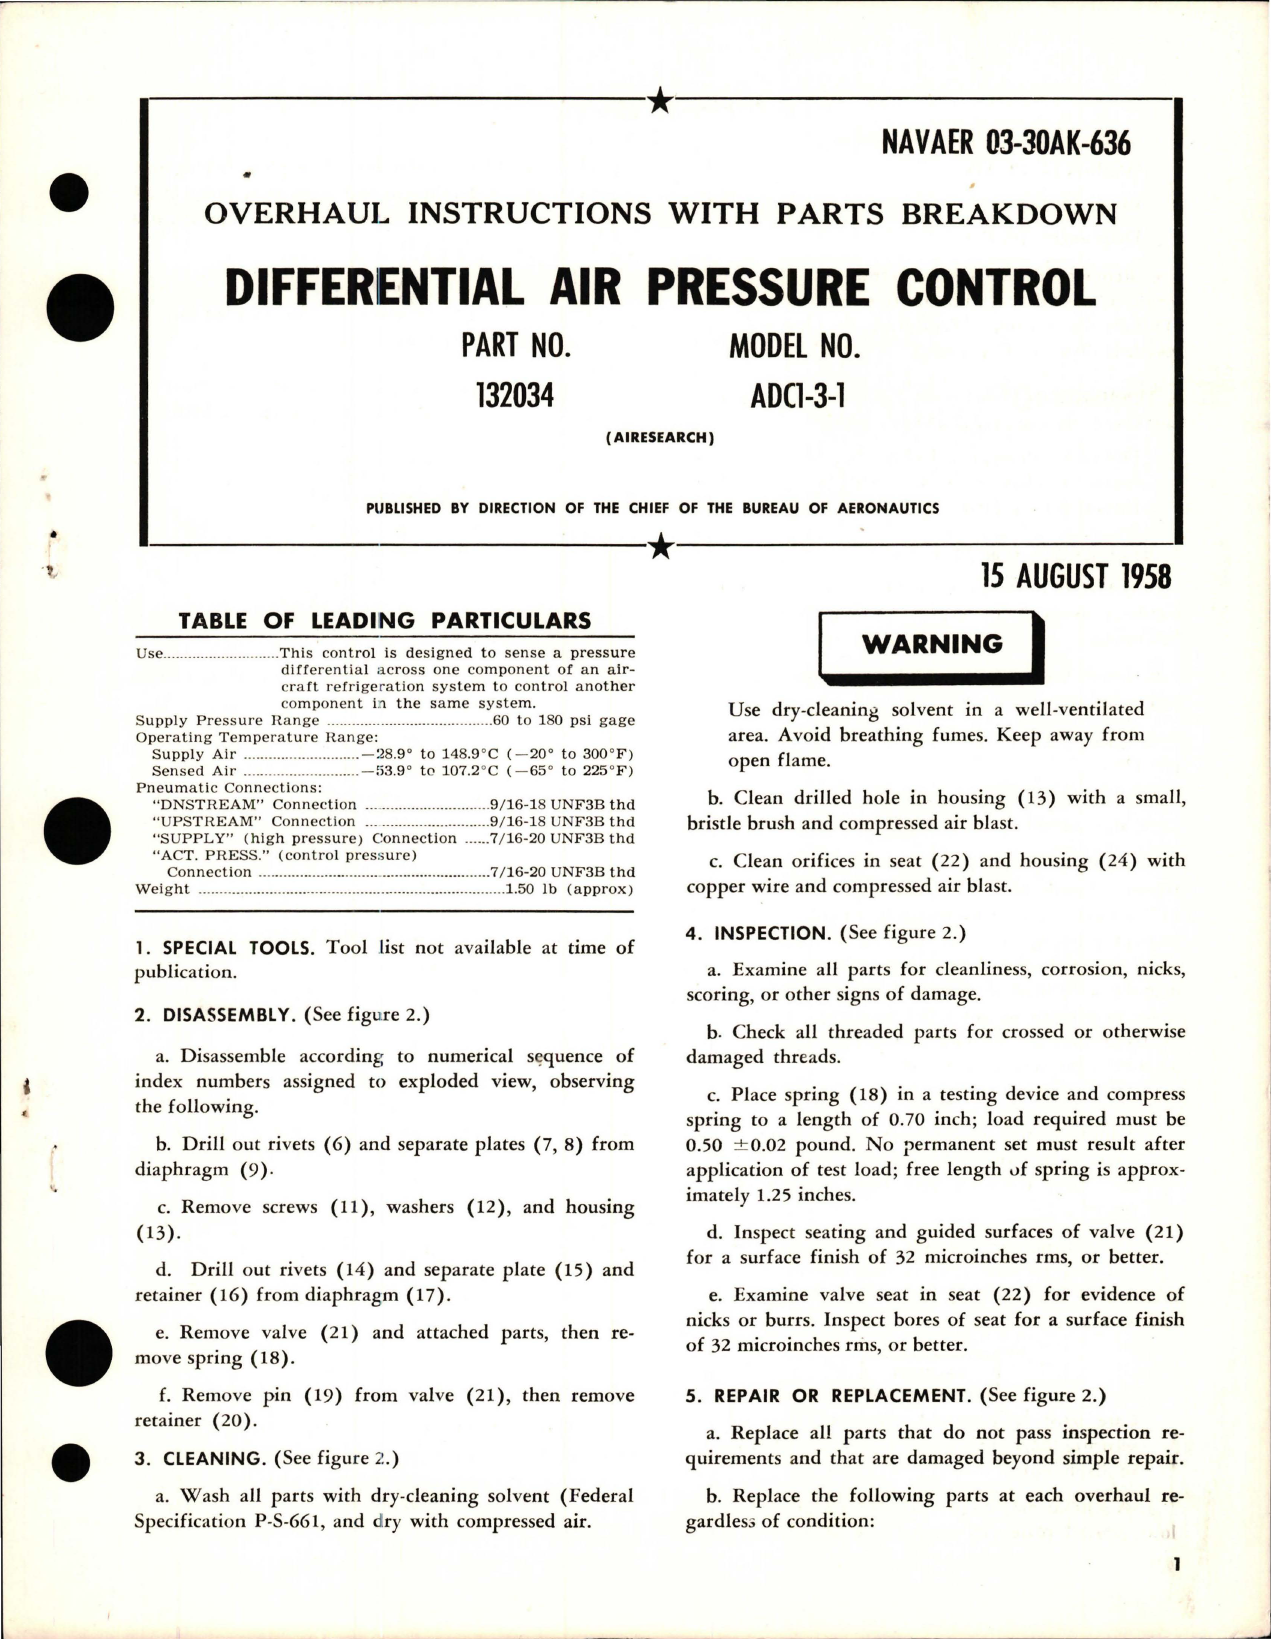 Sample page 1 from AirCorps Library document: Overhaul Instructions with Parts Breakdown for Differential Air Pressure Control - Part 132034 - Model ADC1-3-1 